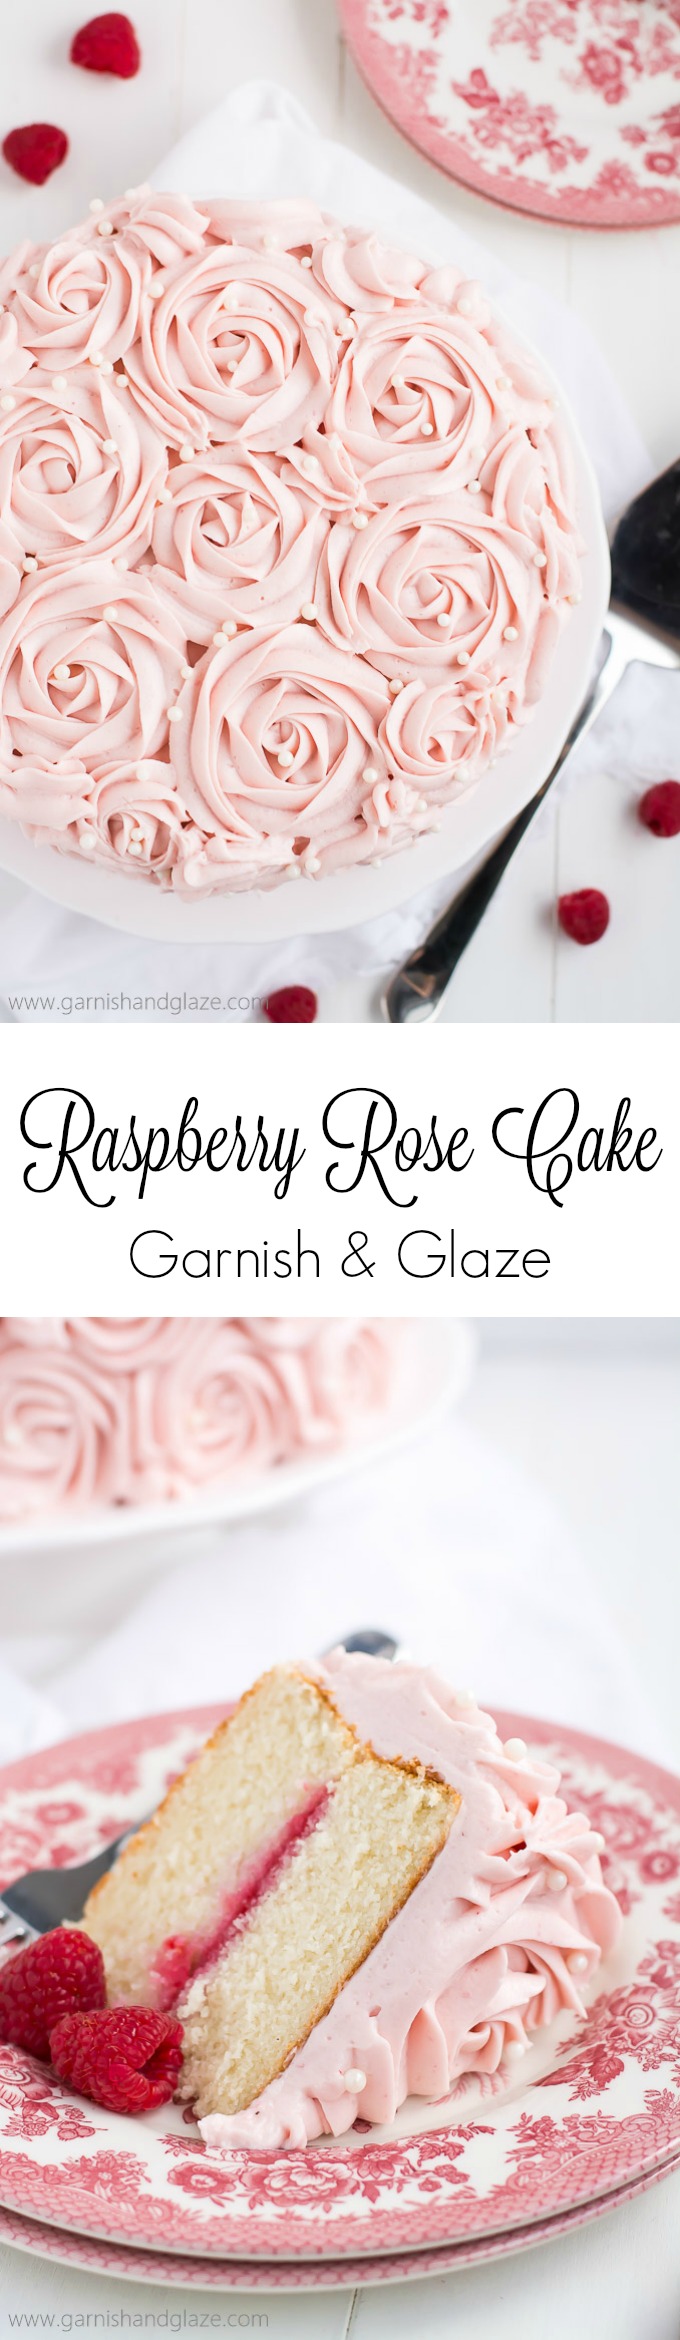 Raspberry Rose Cake is made up of two tender white cakes with sweet raspberry jam sandwiched between and then covered in rose-like swirls of silky smooth raspberry cream cheese frosting. It's the perfect cake for Valentine's Day, a bridal shower, a baby shower... or any time you need a yummy pink cake!